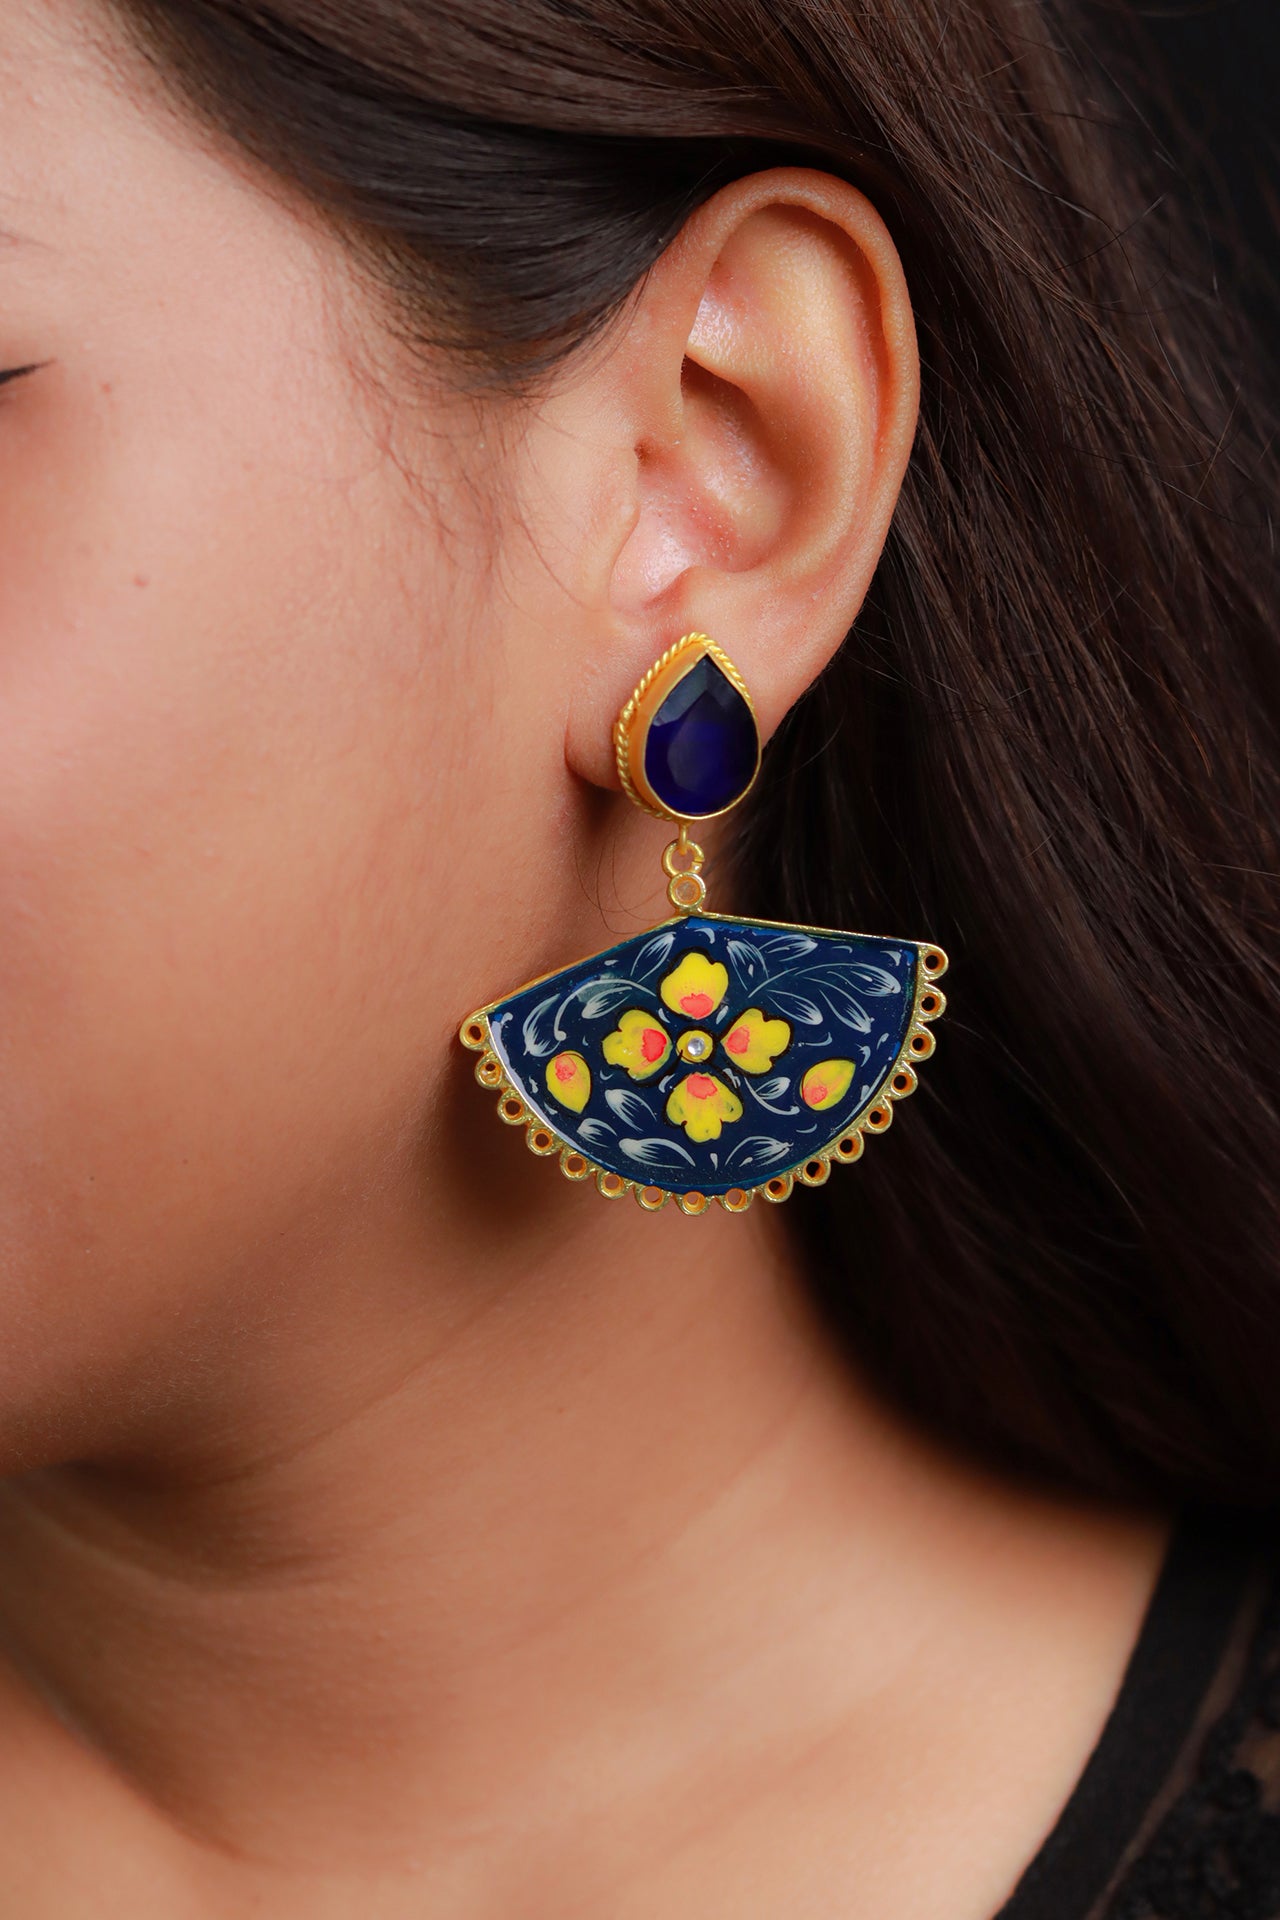 Flipkart.com - Buy CRUNCHY FASHION Gold-Plated Floral stud style jhalar Blue  Meenakari Earrings Alloy Drops & Danglers Online at Best Prices in India